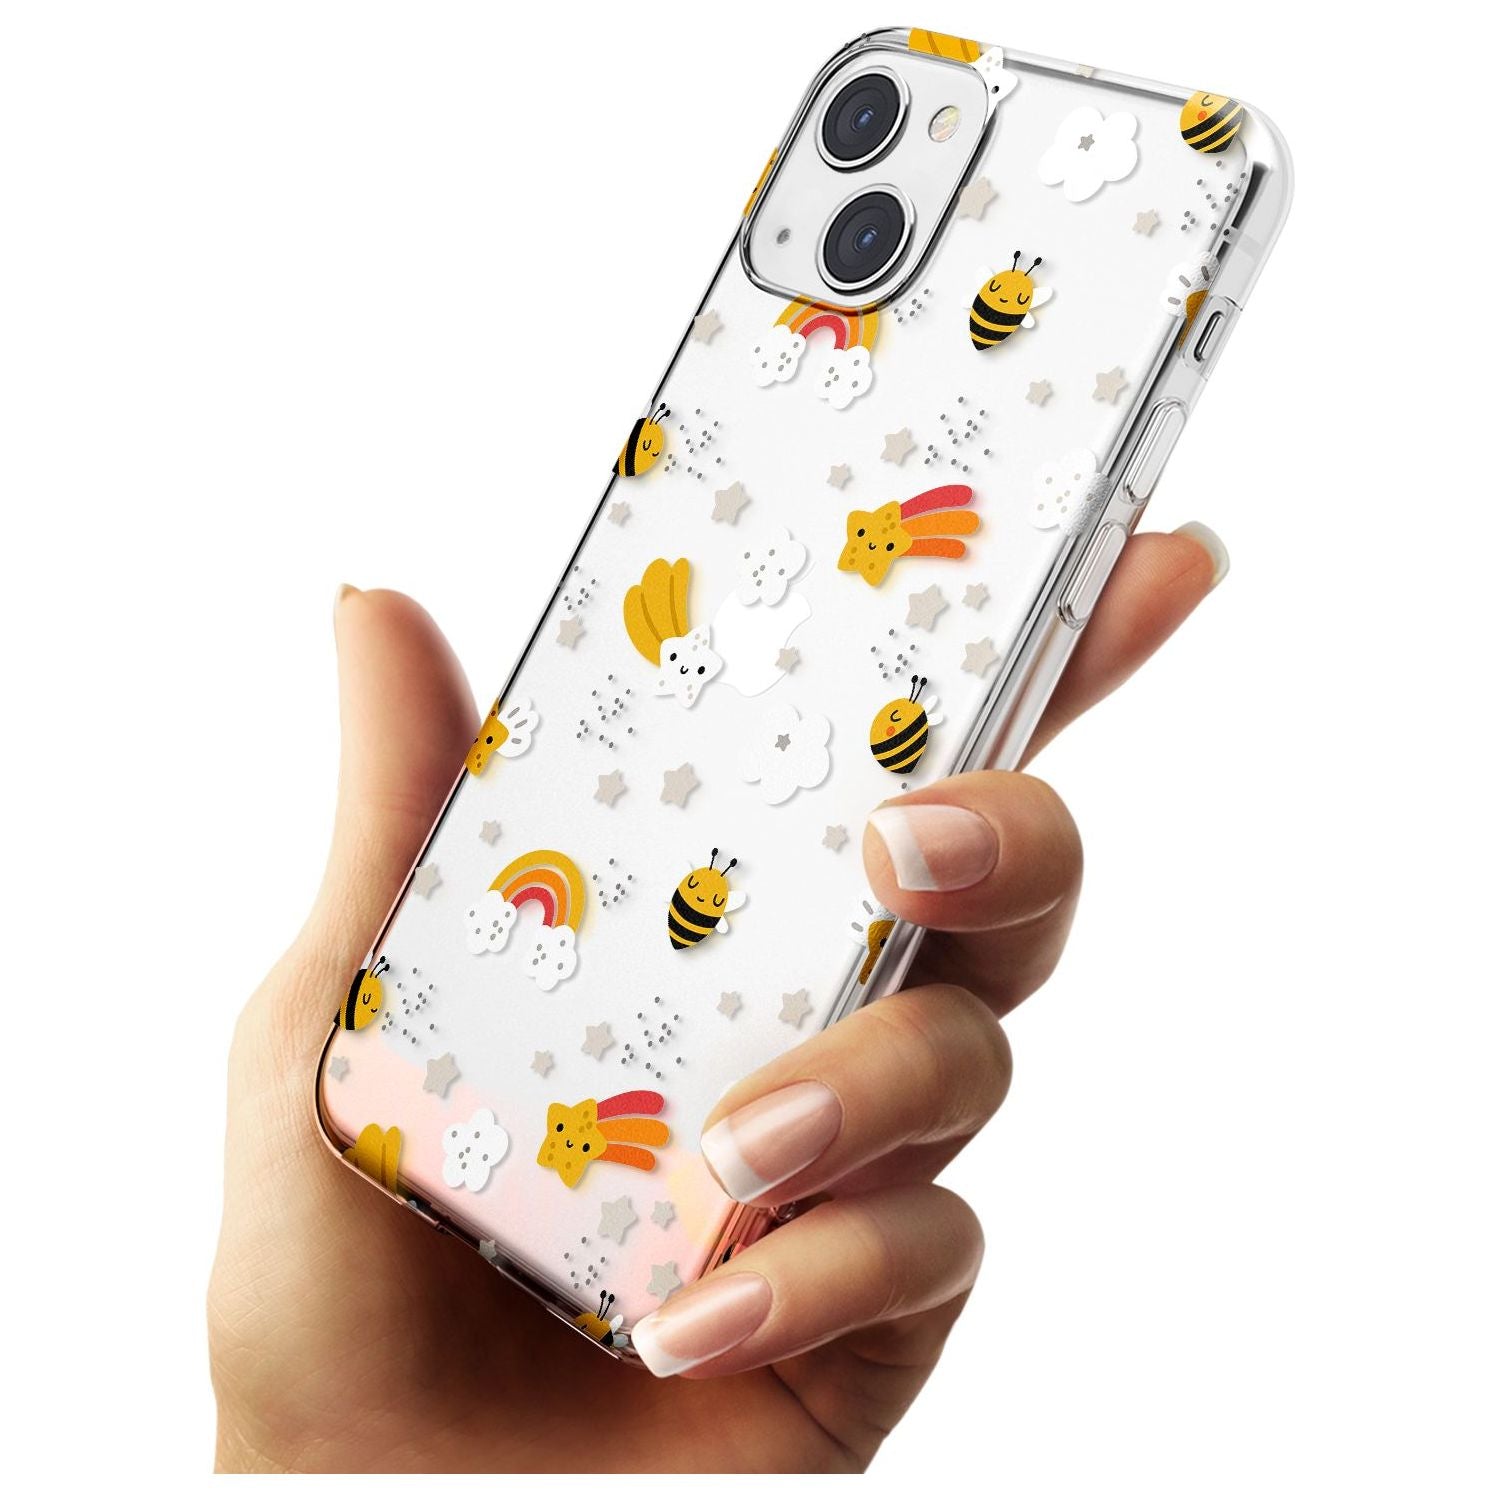 Busy Bee Phone Case iPhone 15 Pro Max / Black Impact Case,iPhone 15 Plus / Black Impact Case,iPhone 15 Pro / Black Impact Case,iPhone 15 / Black Impact Case,iPhone 15 Pro Max / Impact Case,iPhone 15 Plus / Impact Case,iPhone 15 Pro / Impact Case,iPhone 15 / Impact Case,iPhone 15 Pro Max / Magsafe Black Impact Case,iPhone 15 Plus / Magsafe Black Impact Case,iPhone 15 Pro / Magsafe Black Impact Case,iPhone 15 / Magsafe Black Impact Case,iPhone 14 Pro Max / Black Impact Case,iPhone 14 Plus / Black Impact Case,